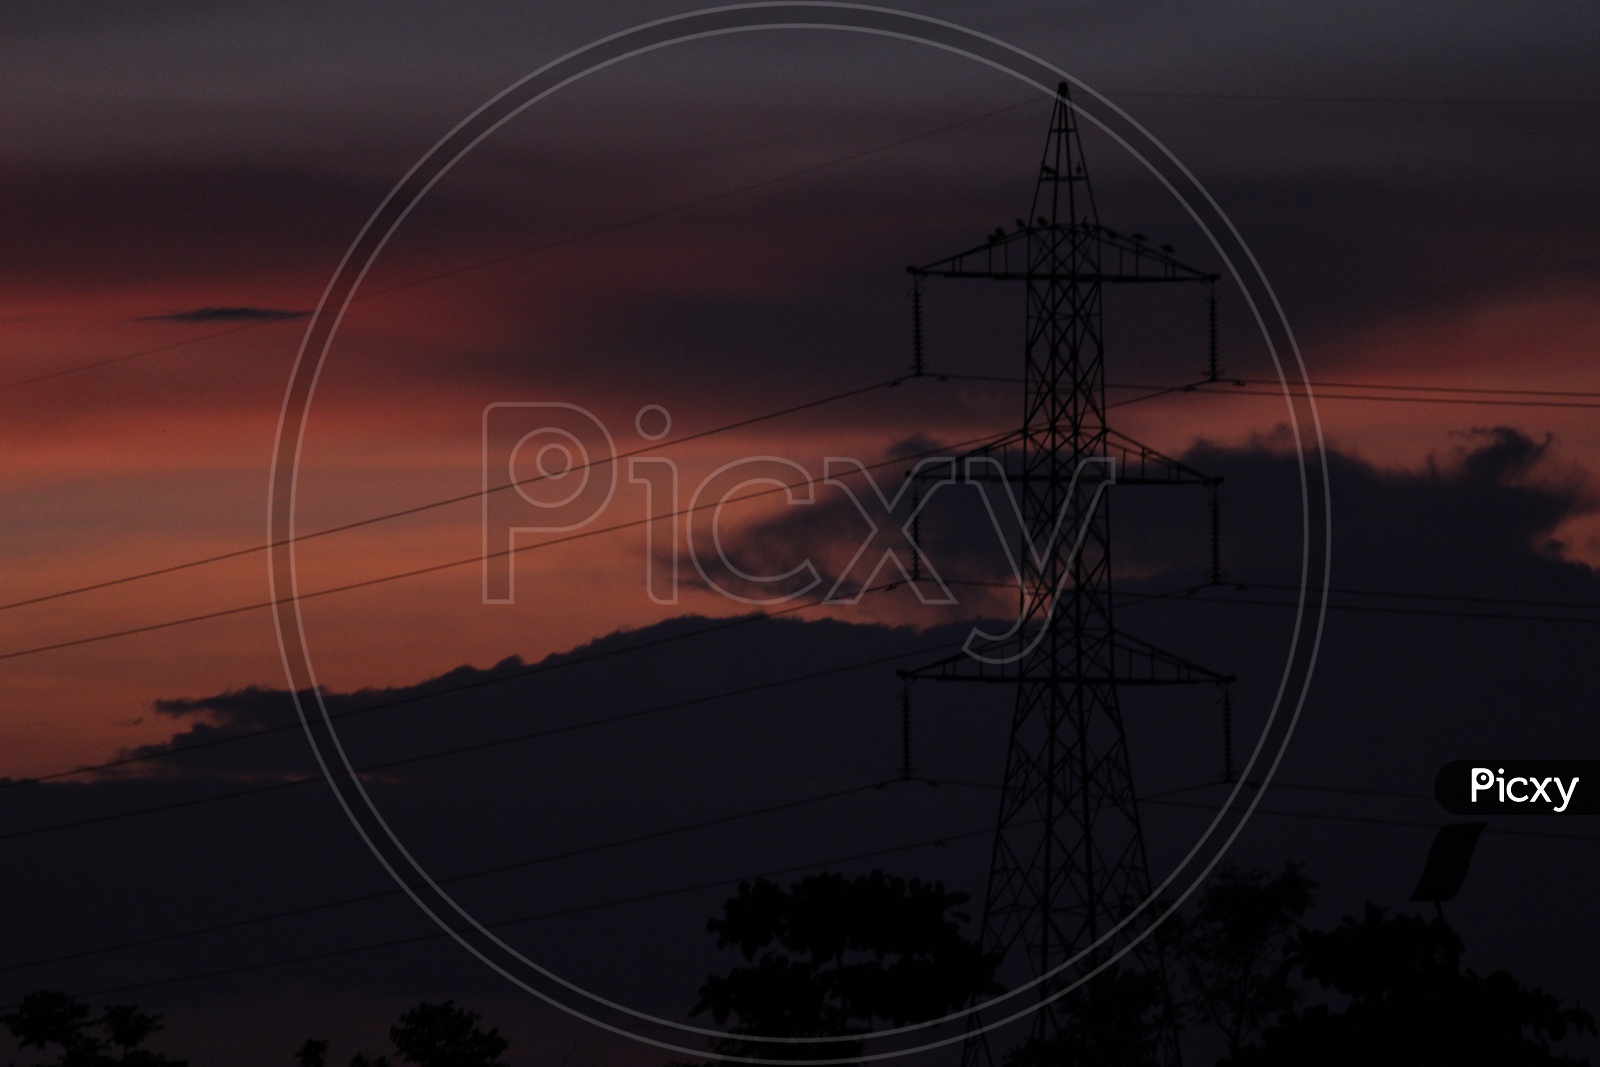 Silhouette of Electricity High tension lines With  Sunset Sky In Background